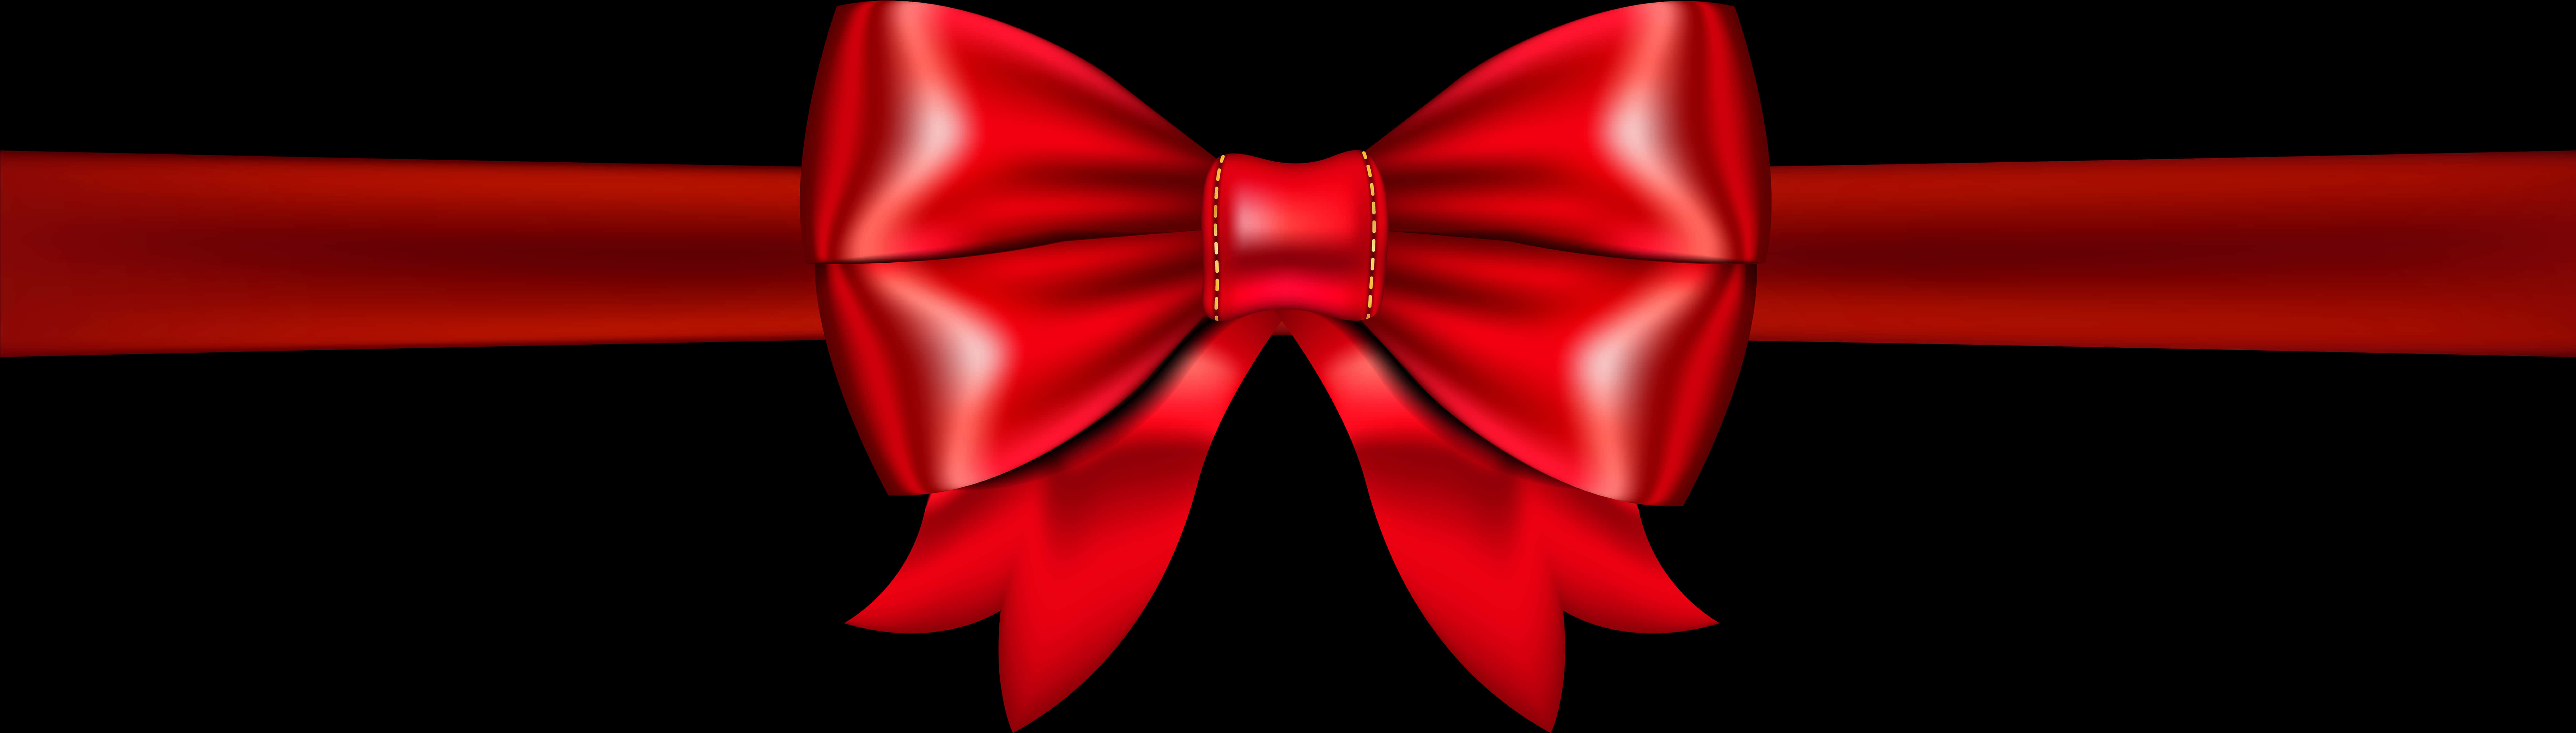 Red Satin Gift Bow